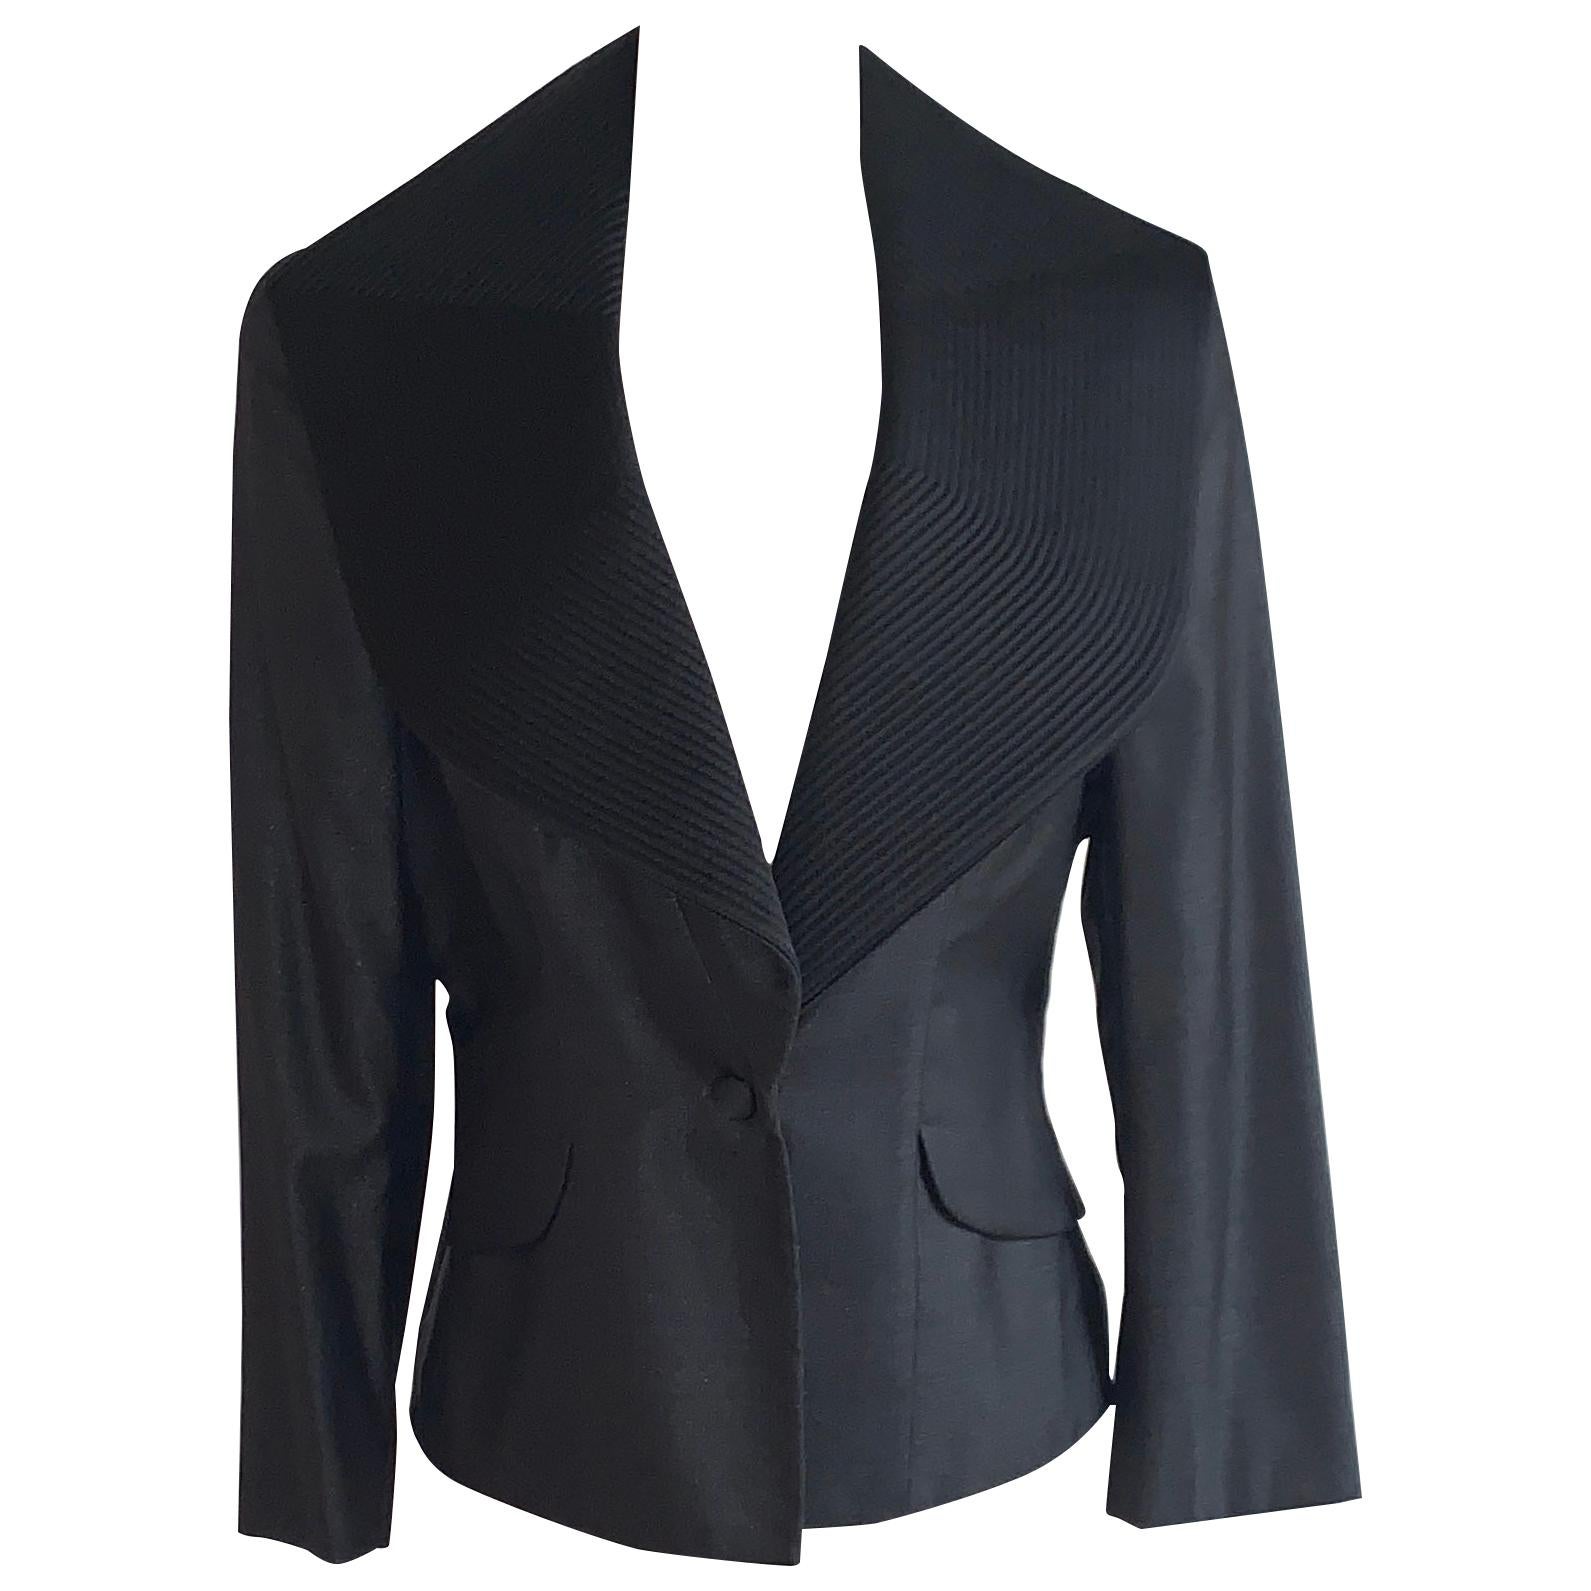 Alexander McQueen 2000s Dark Charcoal and Black Exaggerated Collar Blazer Jacket For Sale